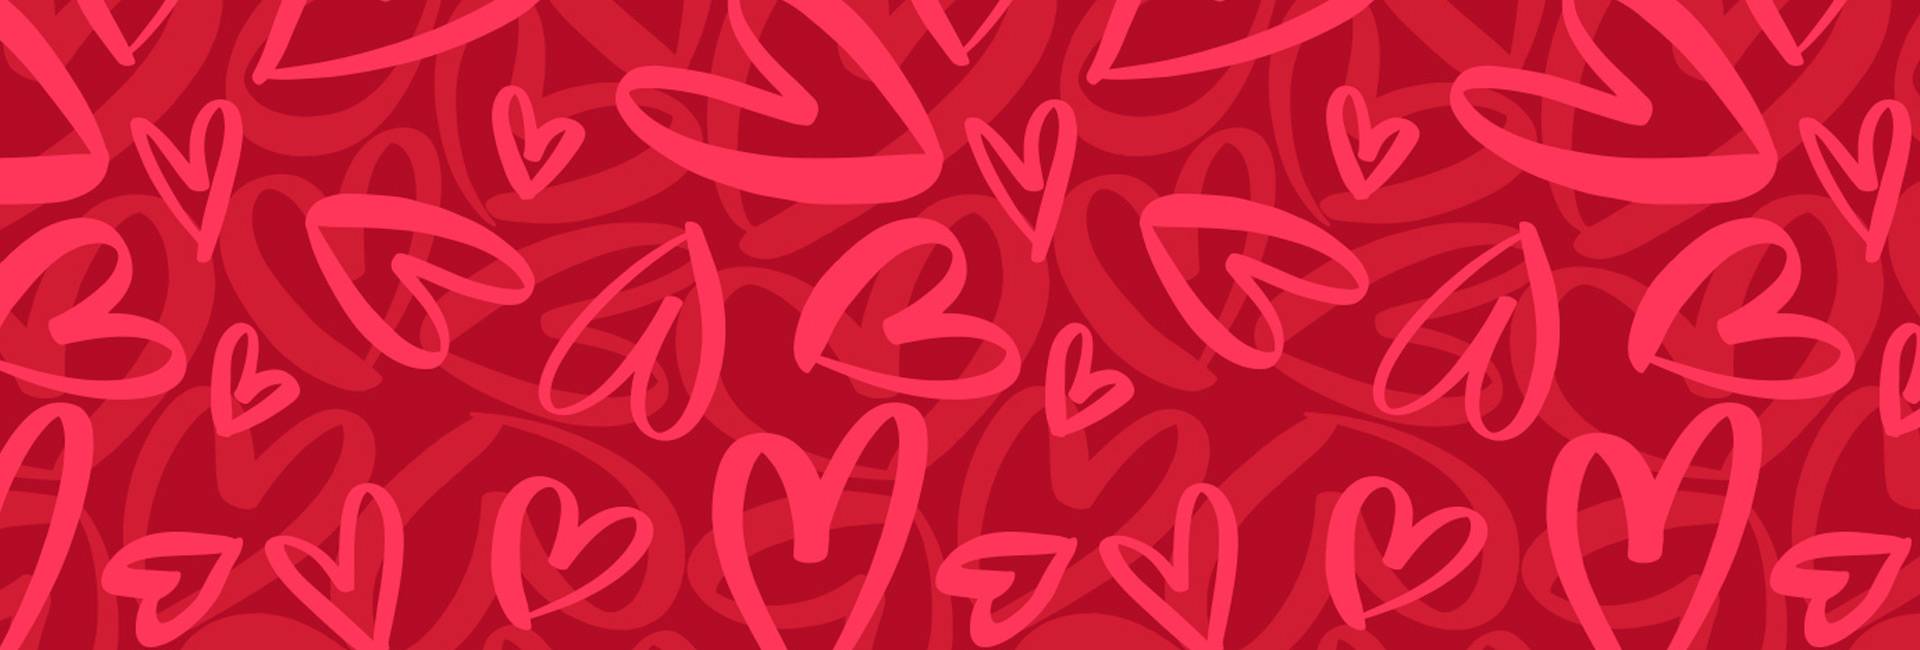 Valentine's Day Graphic with hearts